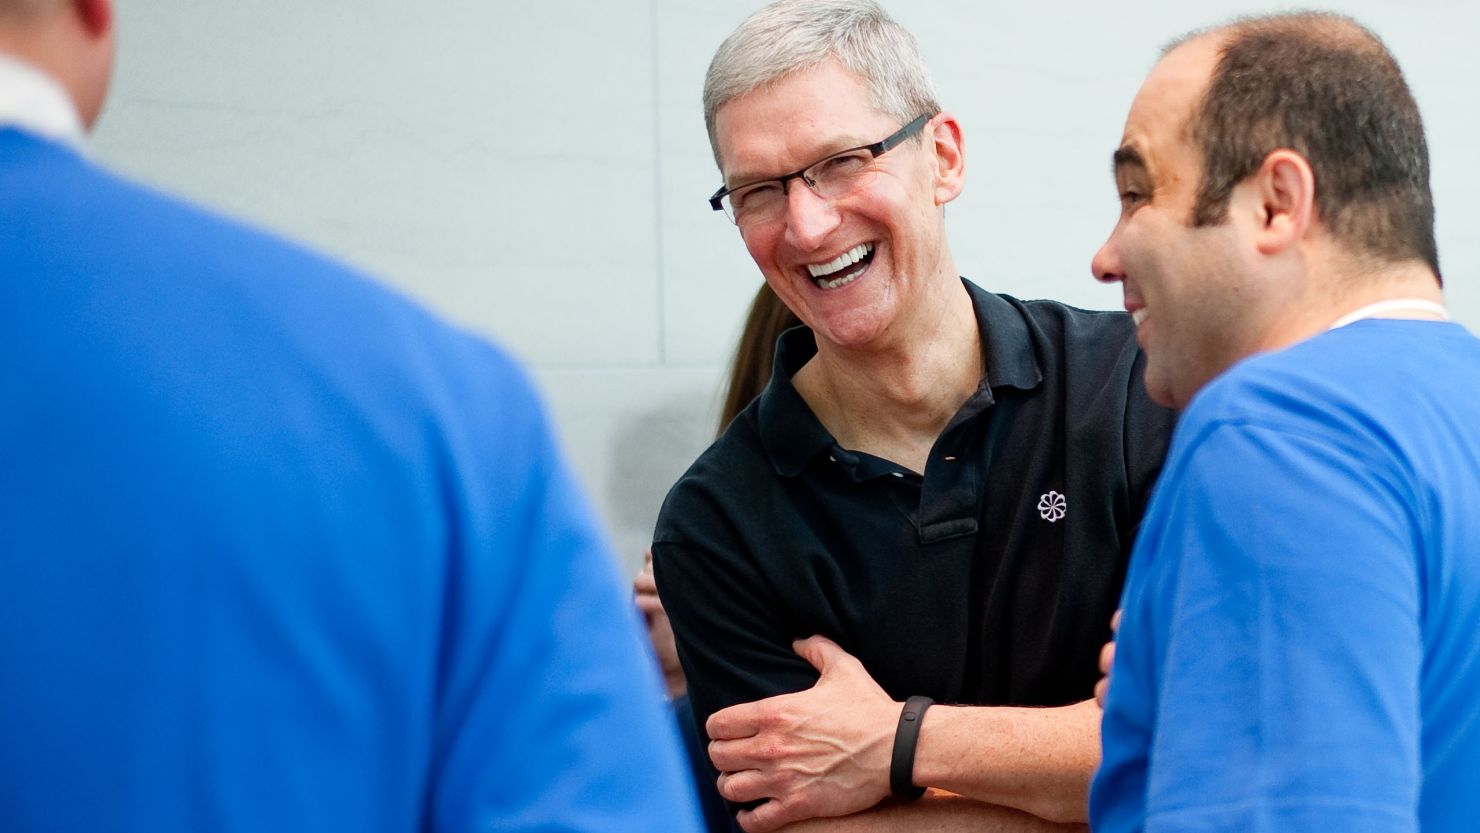 Apple CEO Tim Cook is known to wear a Nike  FuelBand to monitor his fitness. Could an Apple watch be replacing it soon?